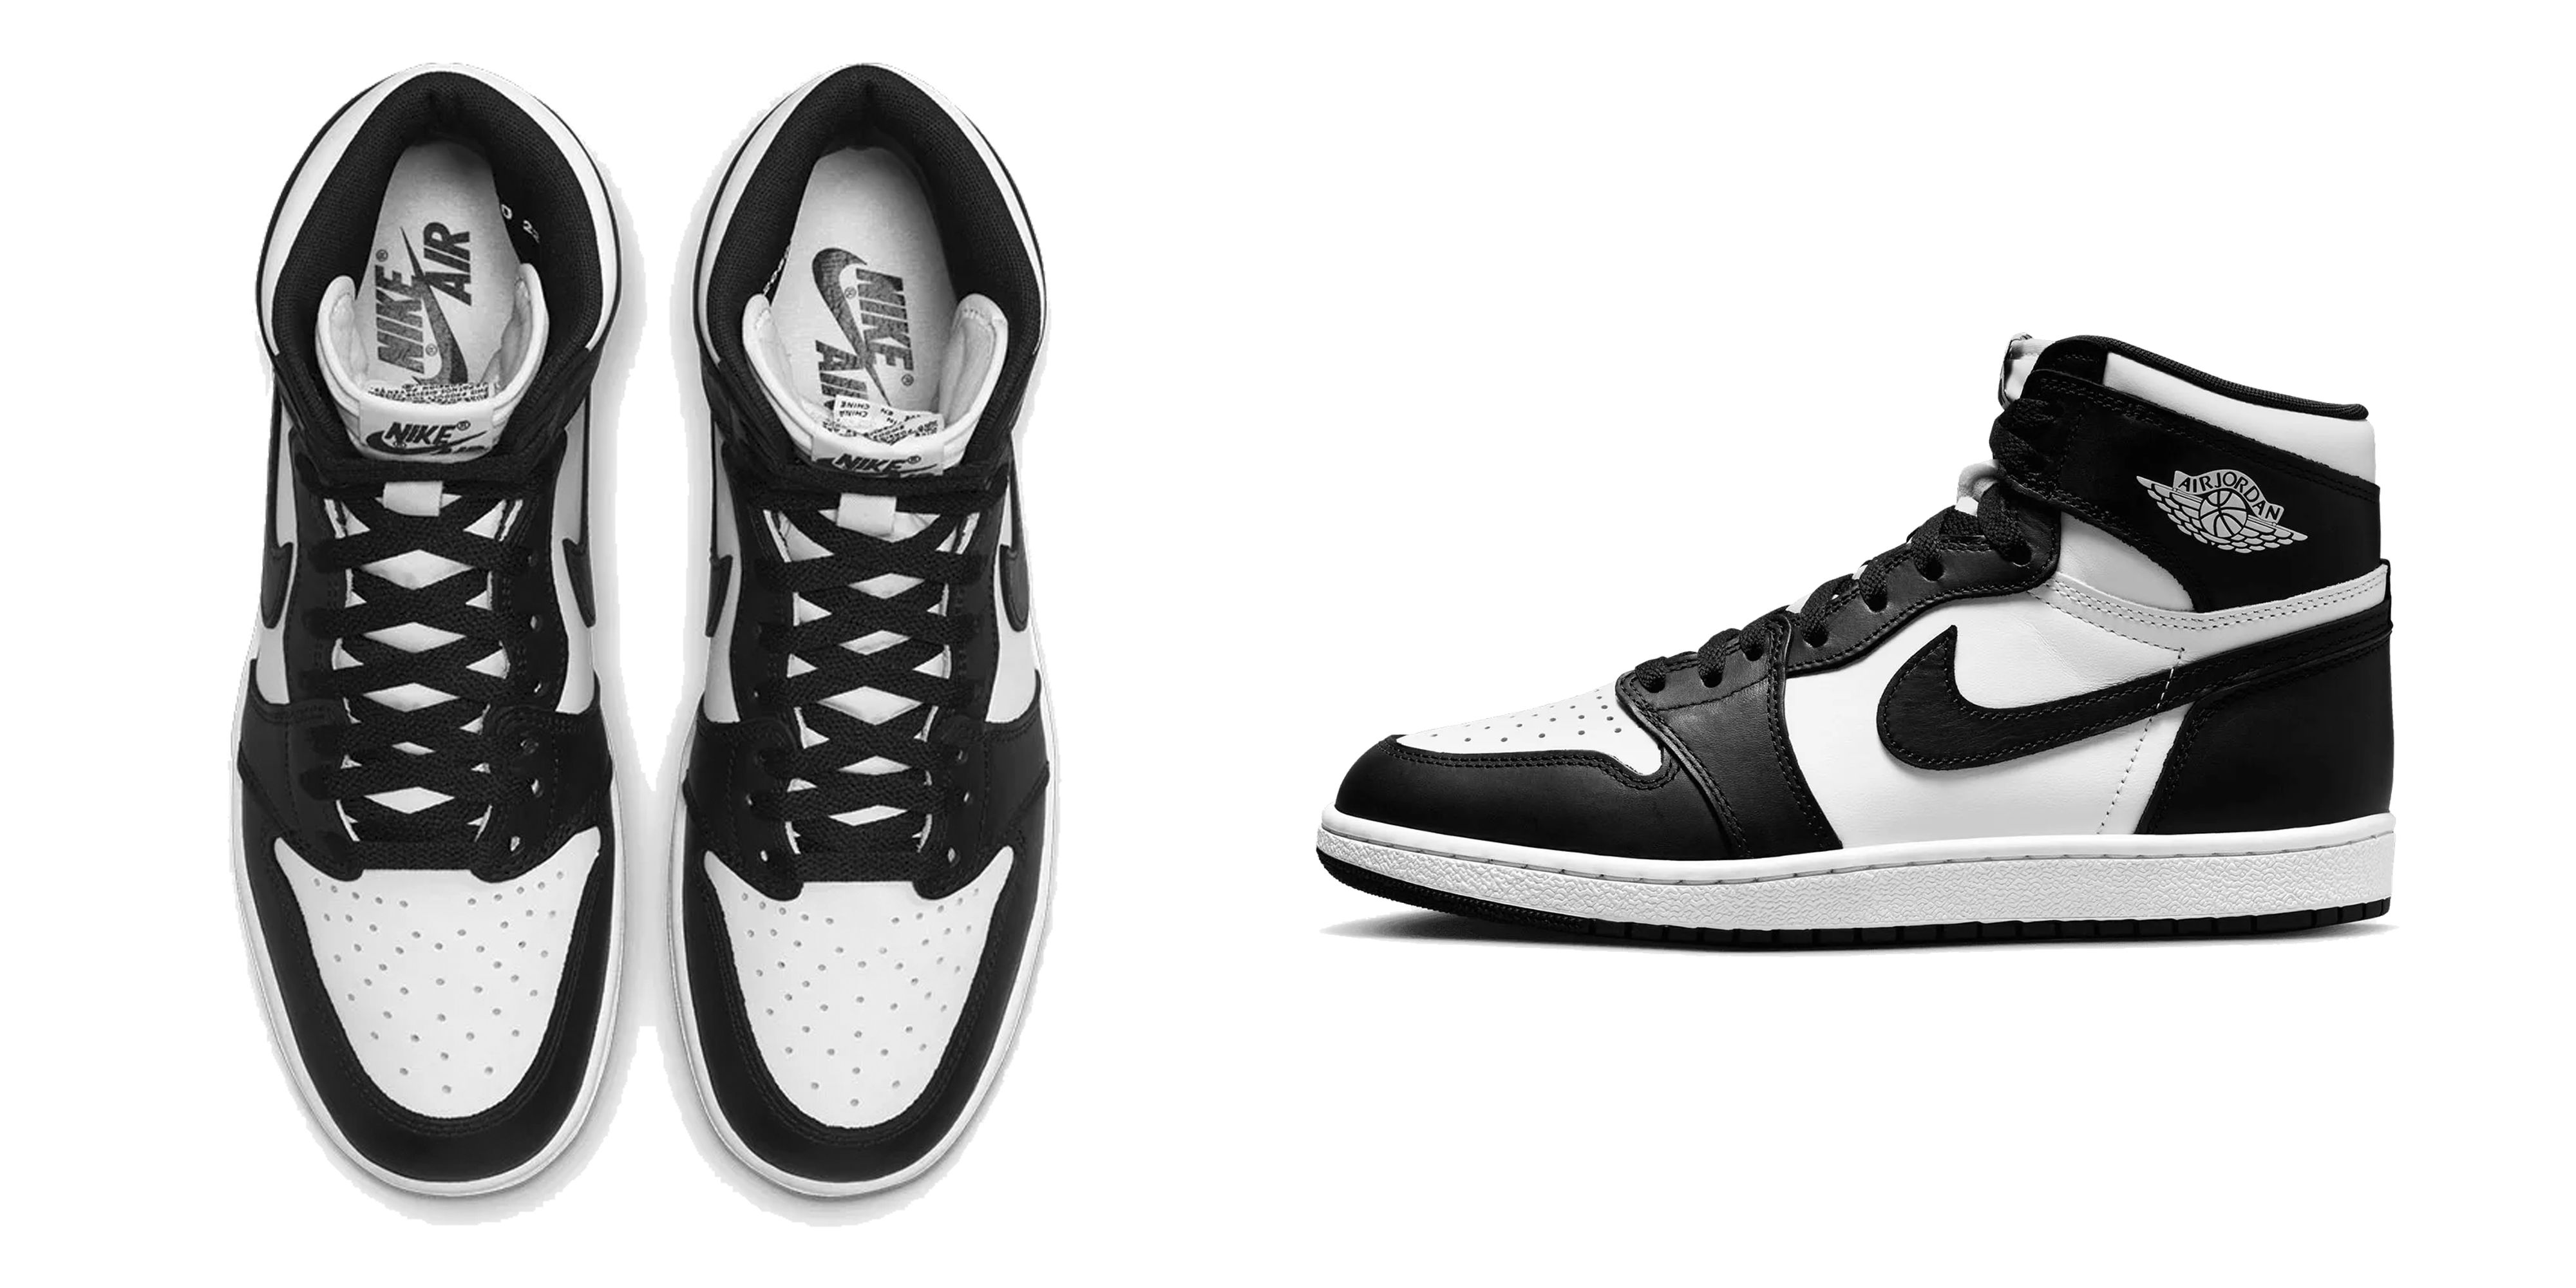 The Air Jordan 1 High 'Black/White' Is About to Drop. Here's Everything to Know